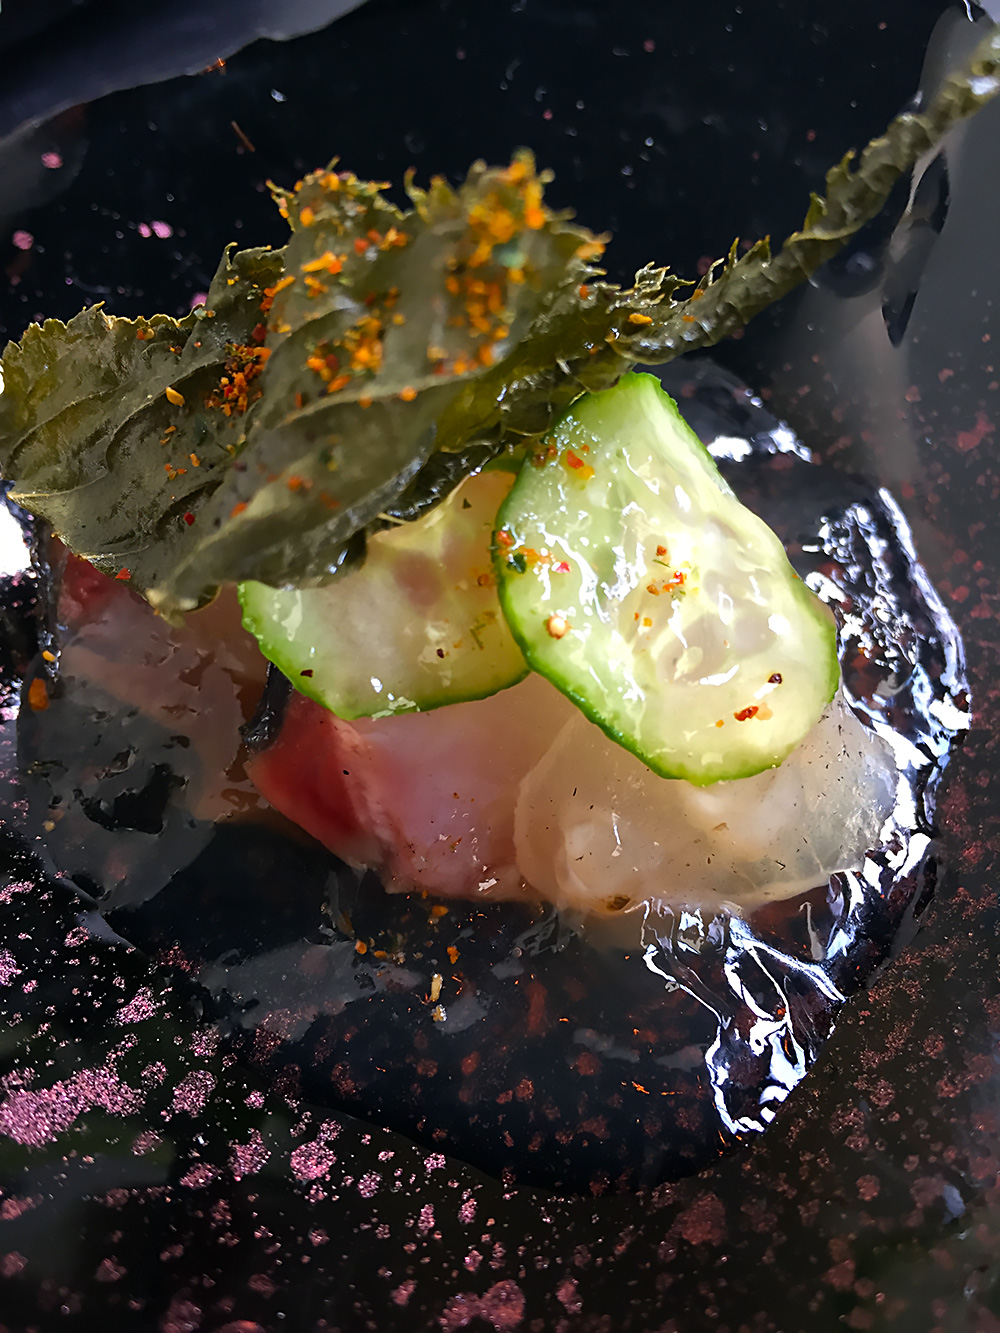 Paired with ‘raw,’ some delicate sashimi